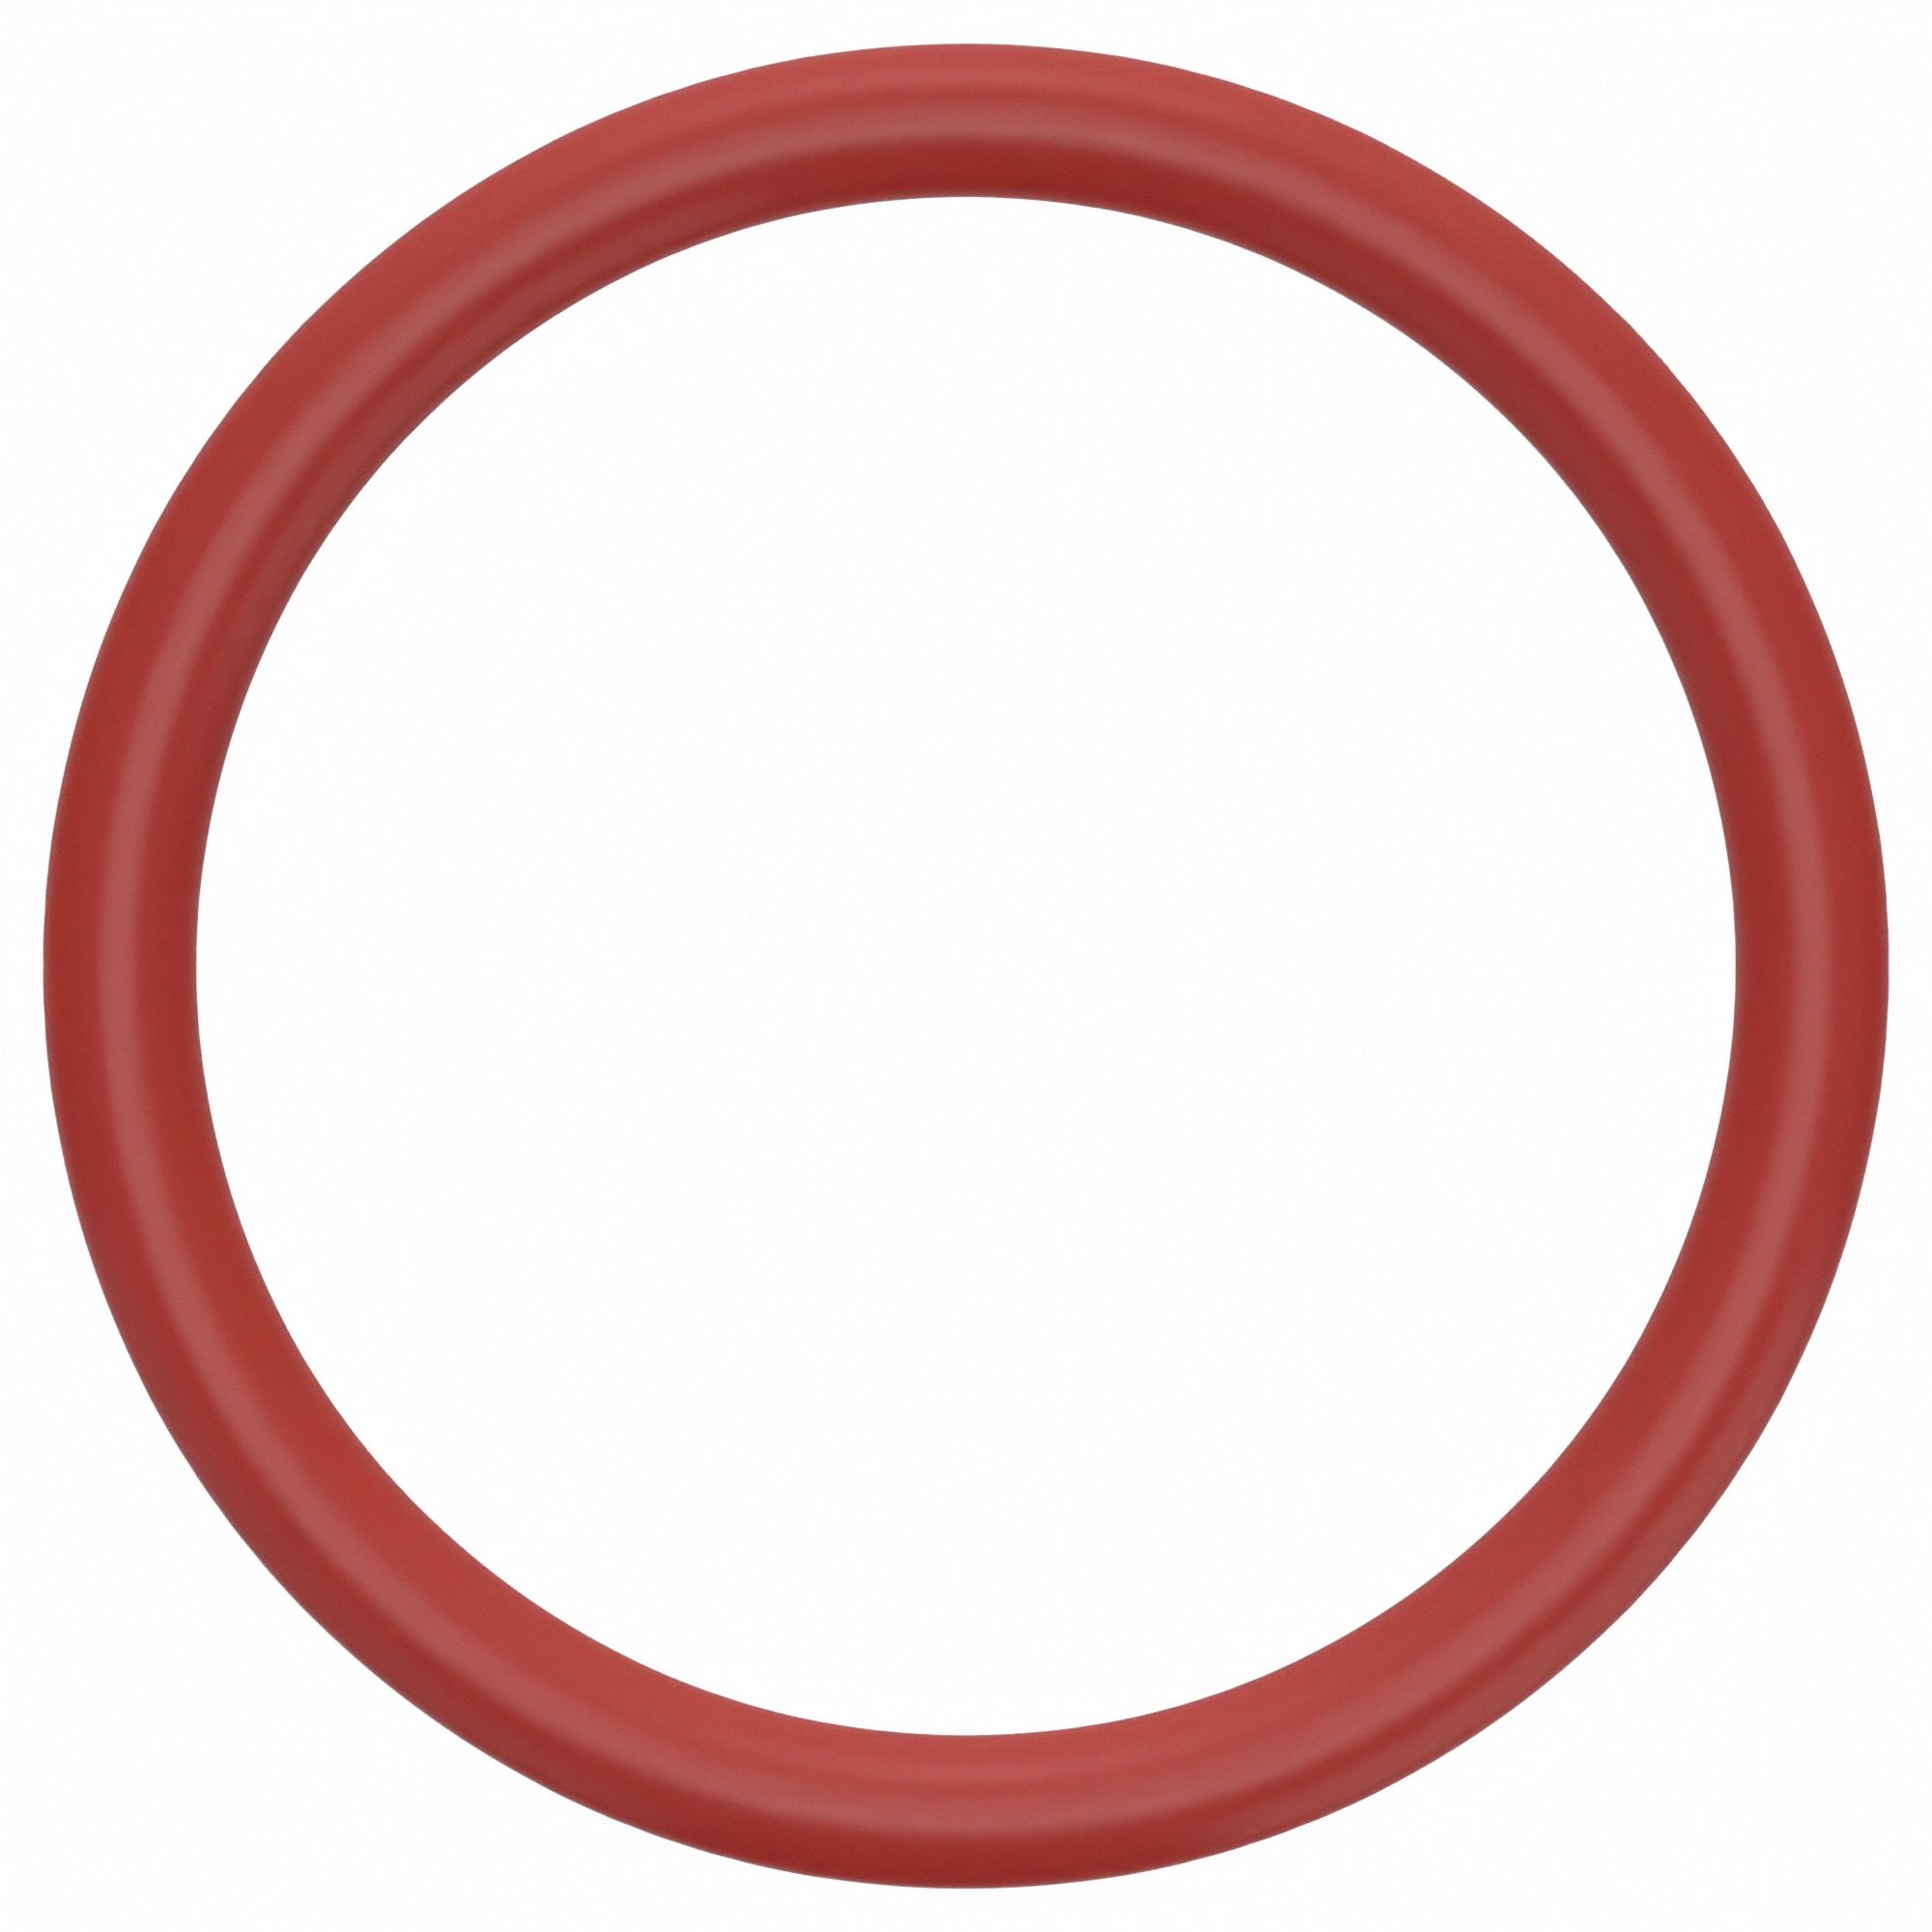 Solid Stainless Steel Metal O-Ring –